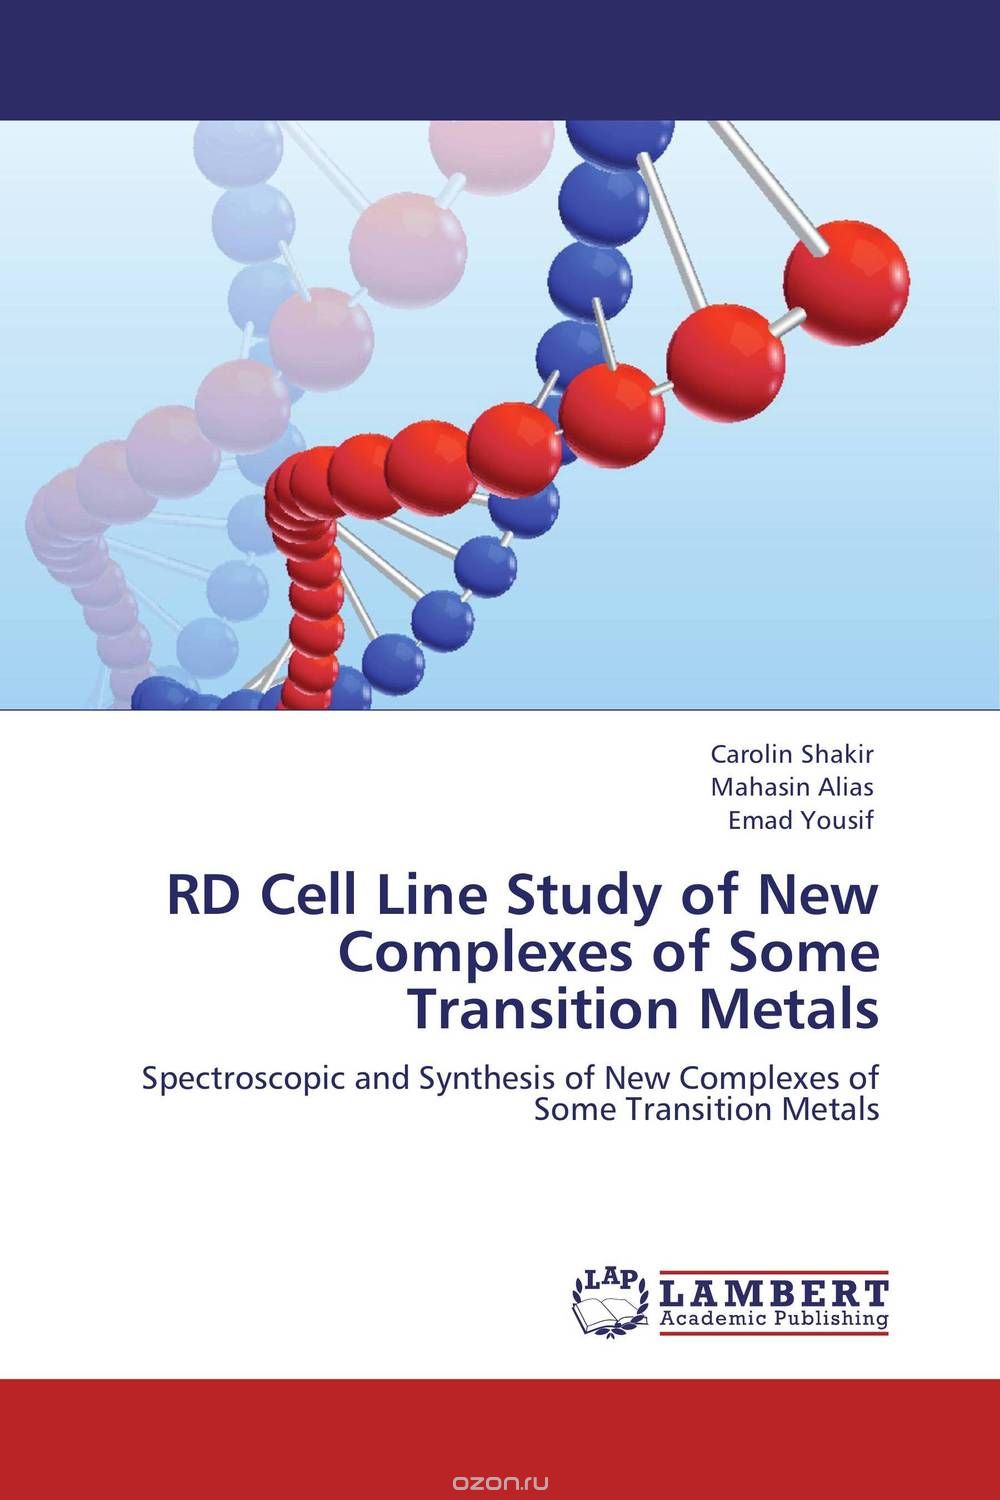 Скачать книгу "RD Cell Line Study of New Complexes of Some Transition Metals"